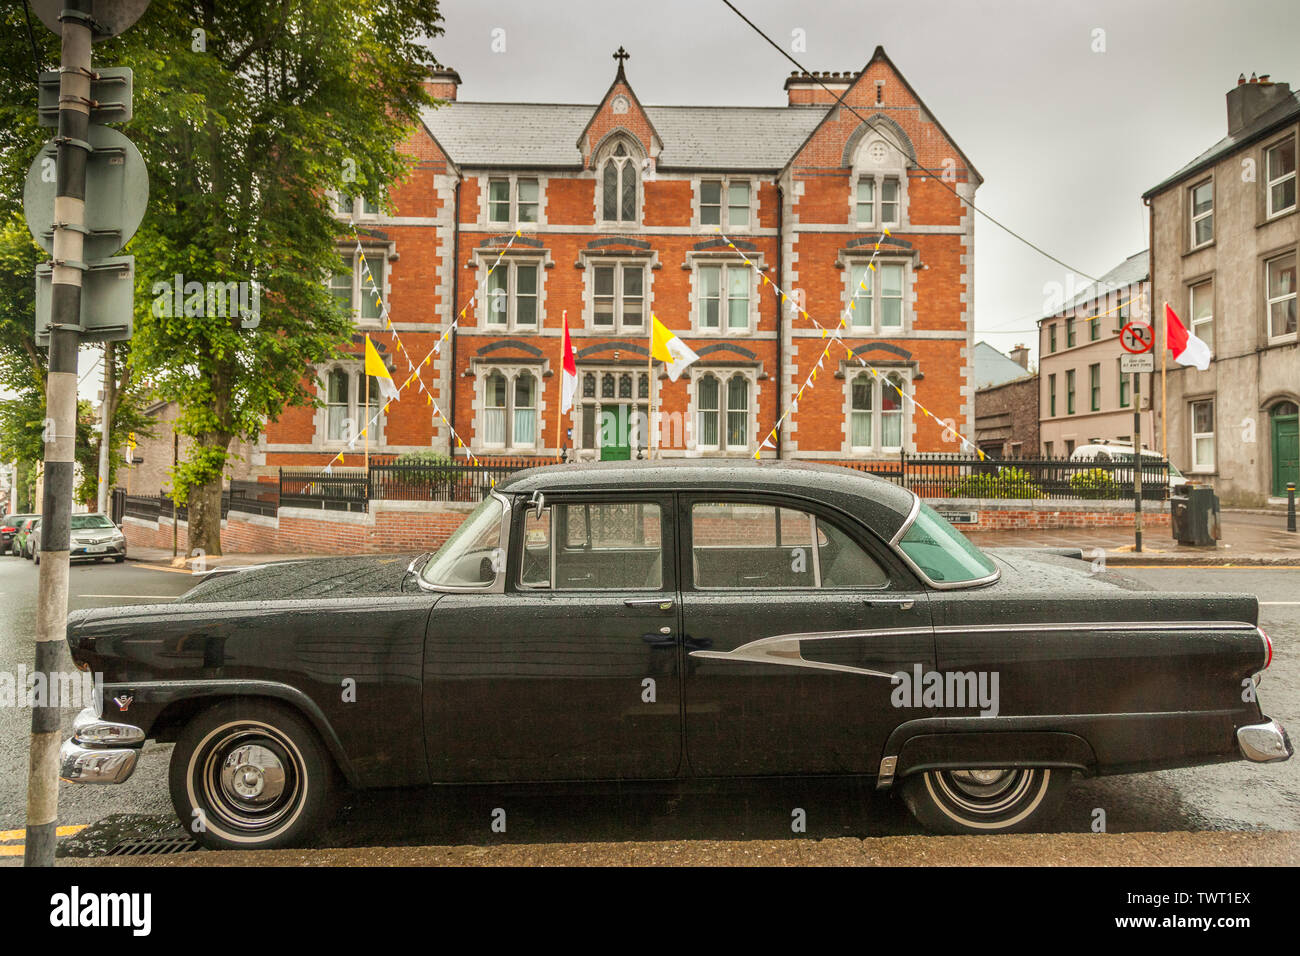 Cork City, Cork, Ireland. 23rd June, 2019. On a wet morning with a status yellow rain warning in place, a 1956 Ford Customline car is parked outside the North Cathedral where bunting has been erected to celebrate the annual Corpus Christi procession that will take place later in the day through the streets of Cork, Ireland. Credit: David Creedon/Alamy Live News Stock Photo